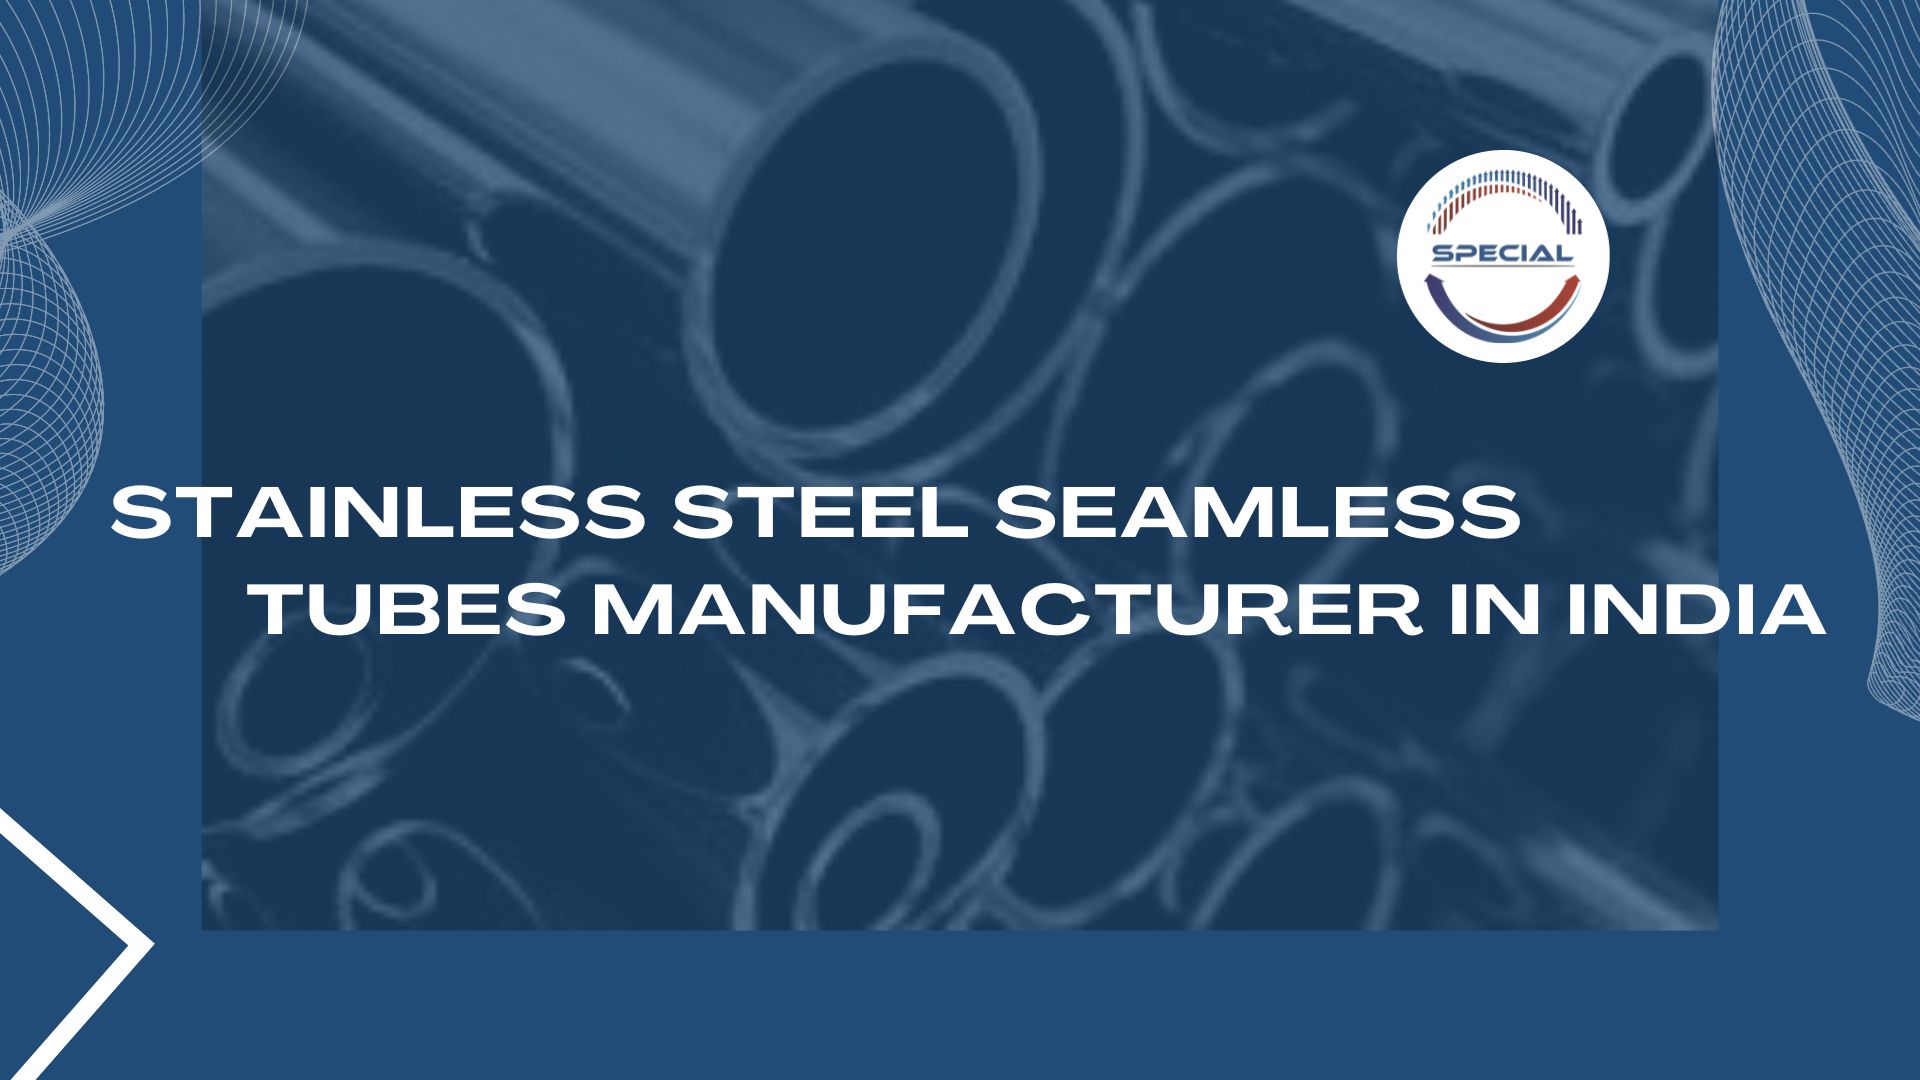 Stainless Steel Seamless Tubes manufacturer in India